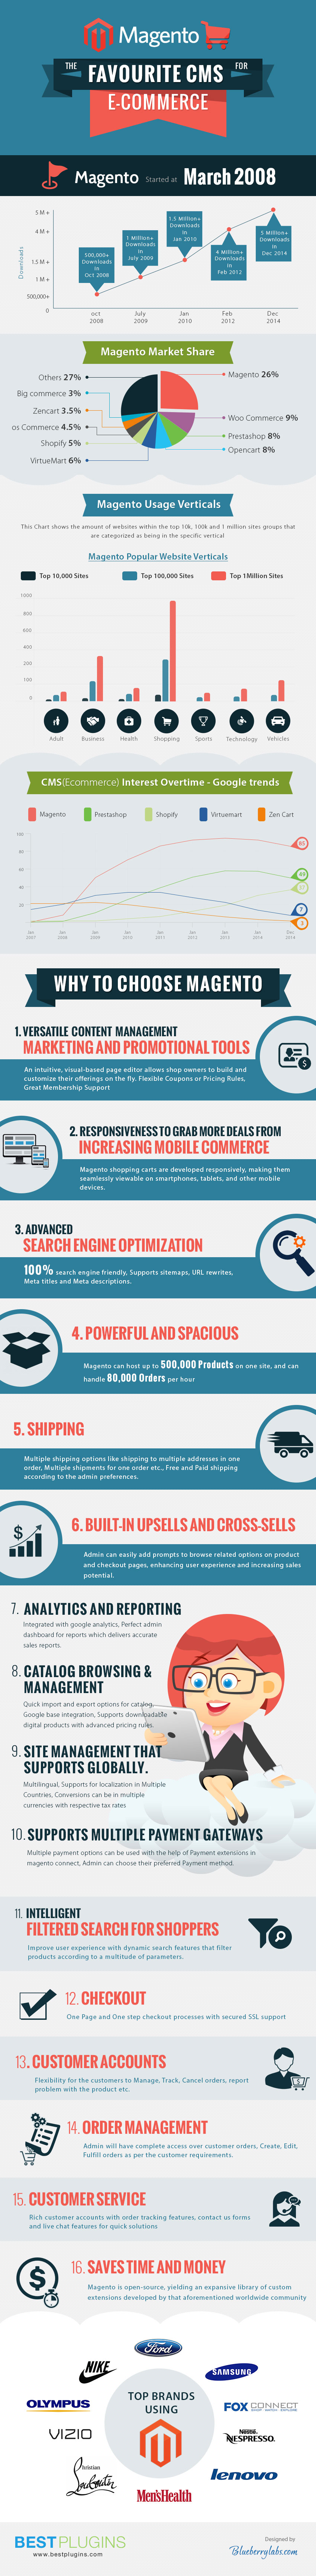 Magento for e-Commerce - Infographic